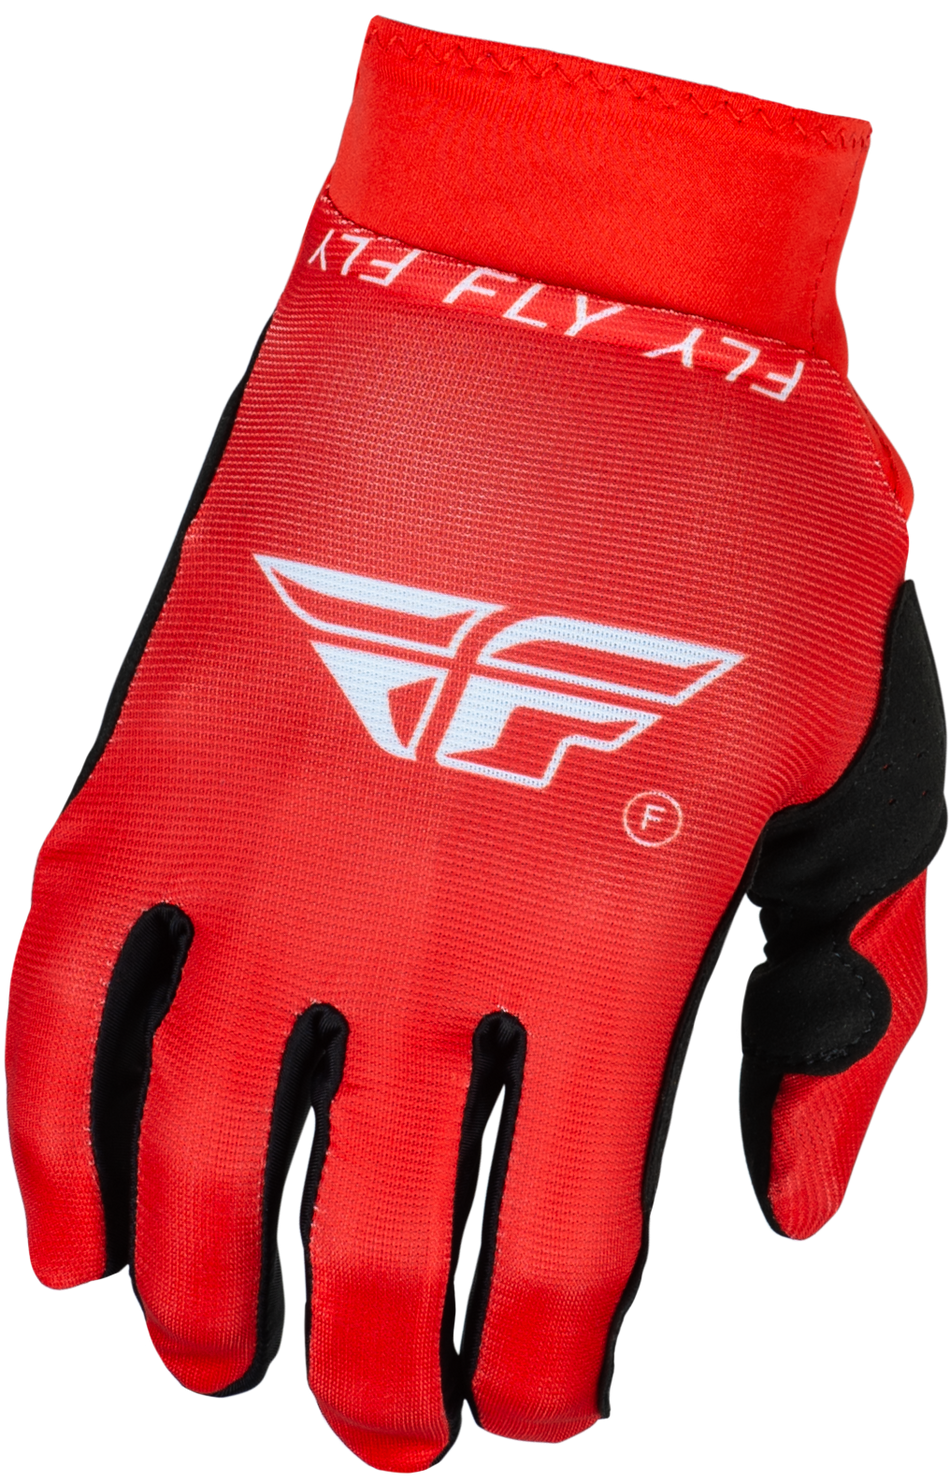 FLY RACING Pro Lite Gloves Red/White 3x 377-0443X